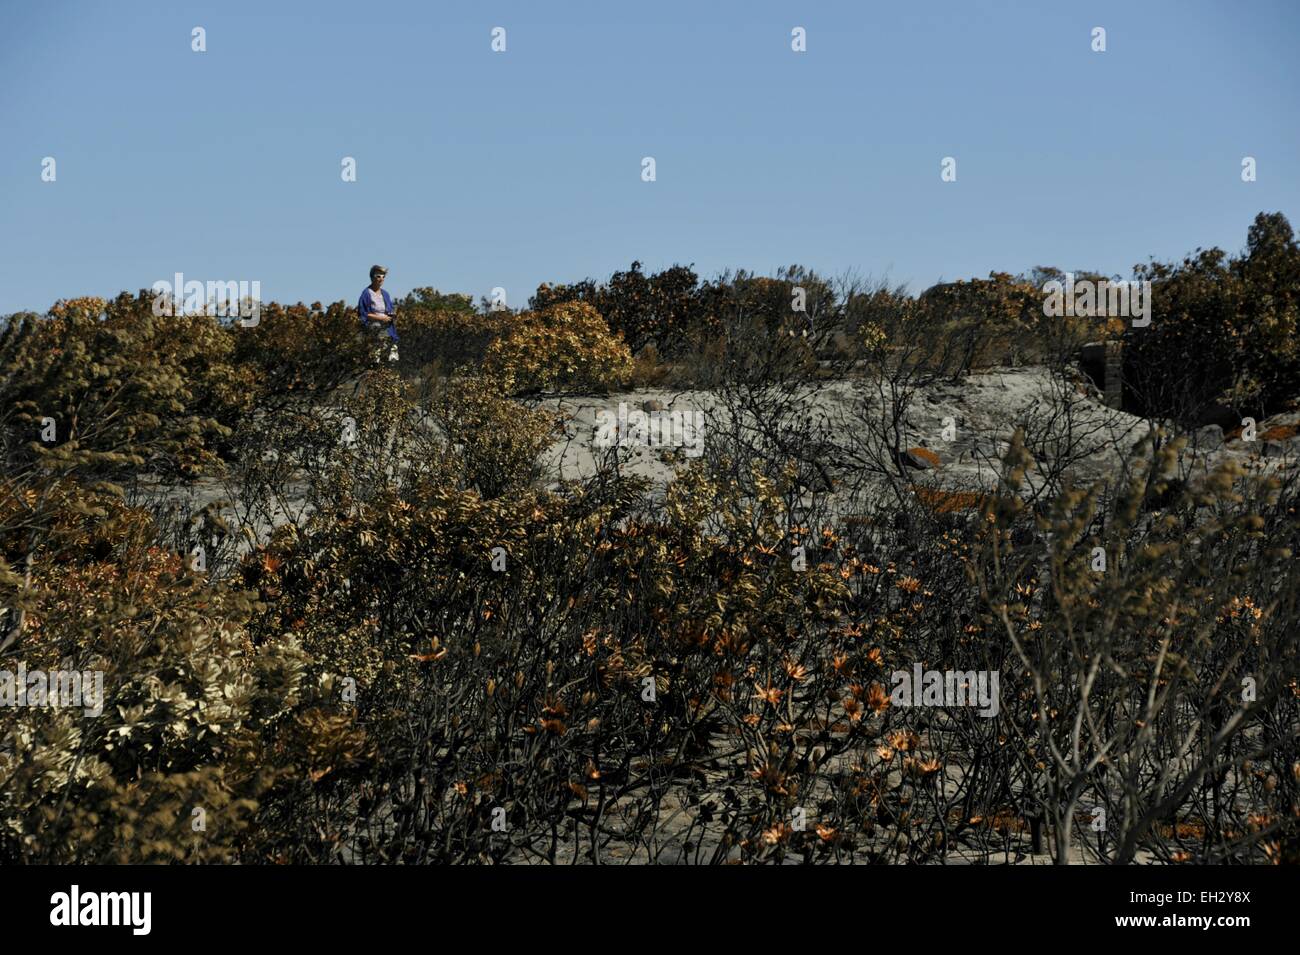 Cape Town, South Africa. 5th March, 2015. A women takes a photo of the burnt vegetation and scorched rocks at Silvermine on Our Kaapse Web high above Constantia and Tokai. Five days of wild fires that have destroyed thousands of hectares of land on the Cape Peninsula south of Table Mountain.      The fires stretched across the mountain from Muizenburg in the east over to Hout Bay and Fishhoek in the west. Strong winds have been hampering efforts to contain the fires. Credit:  STUART WALKER/Alamy Live News Stock Photo